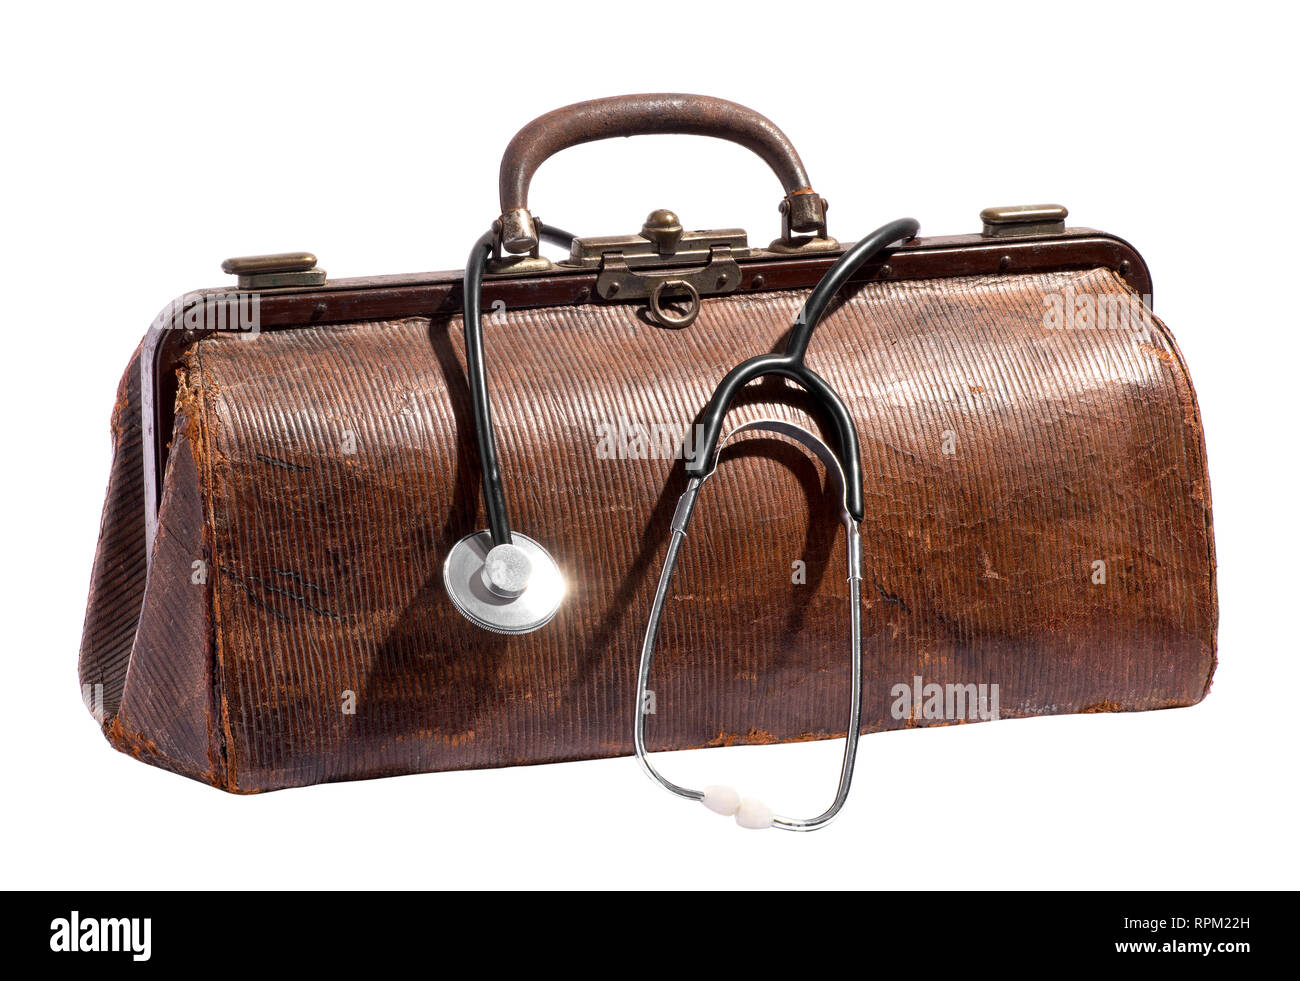 Old vintage leather doctors bag with stethoscope dangling over the side over white in a healthcare and medical concept Stock Photo